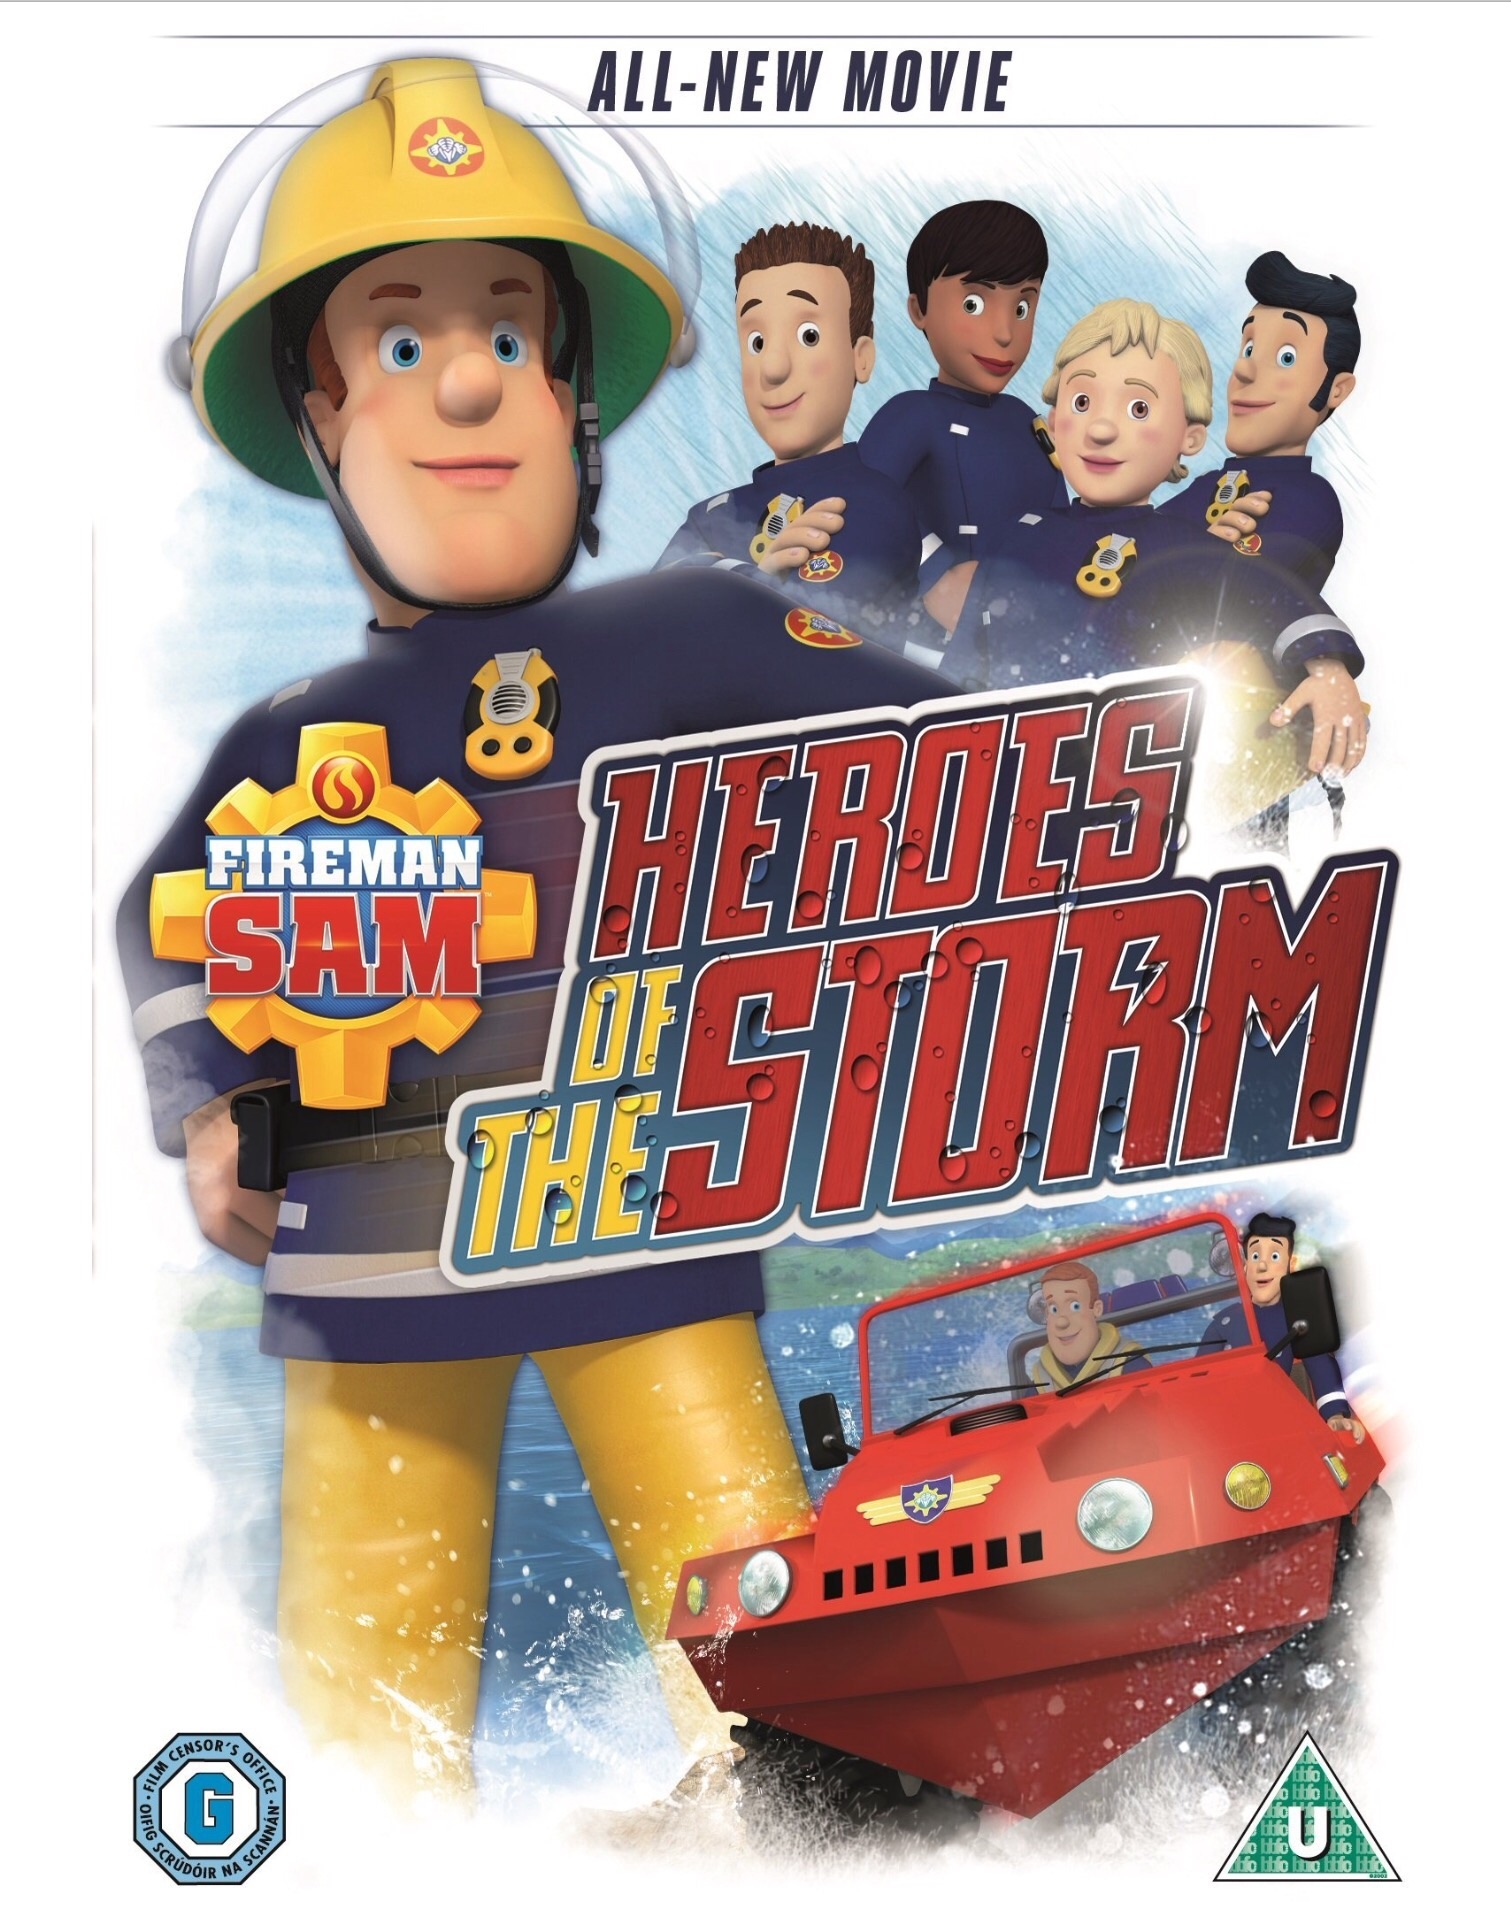 Fireman Sam Heroes Of The Storm (2016)